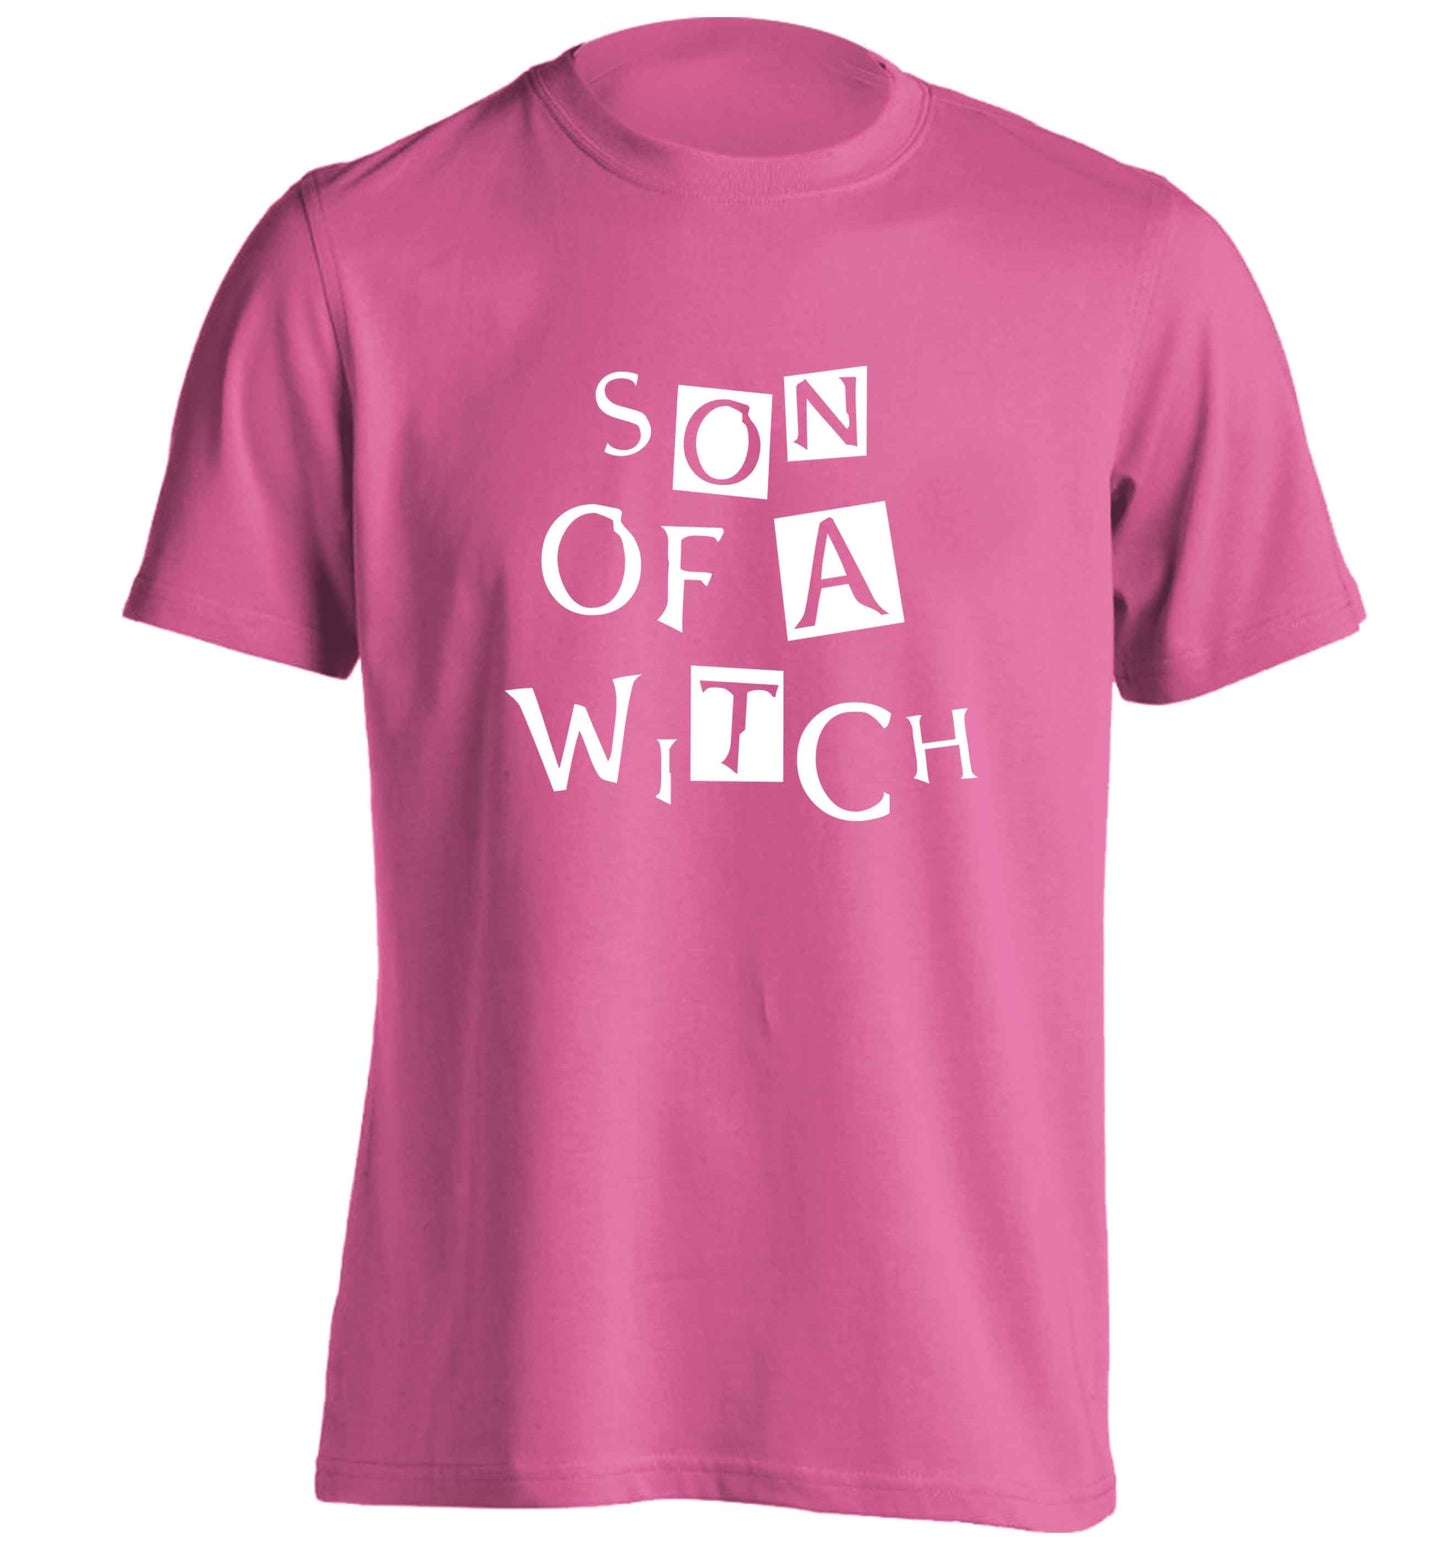 Son of a witch adults unisex pink Tshirt 2XL